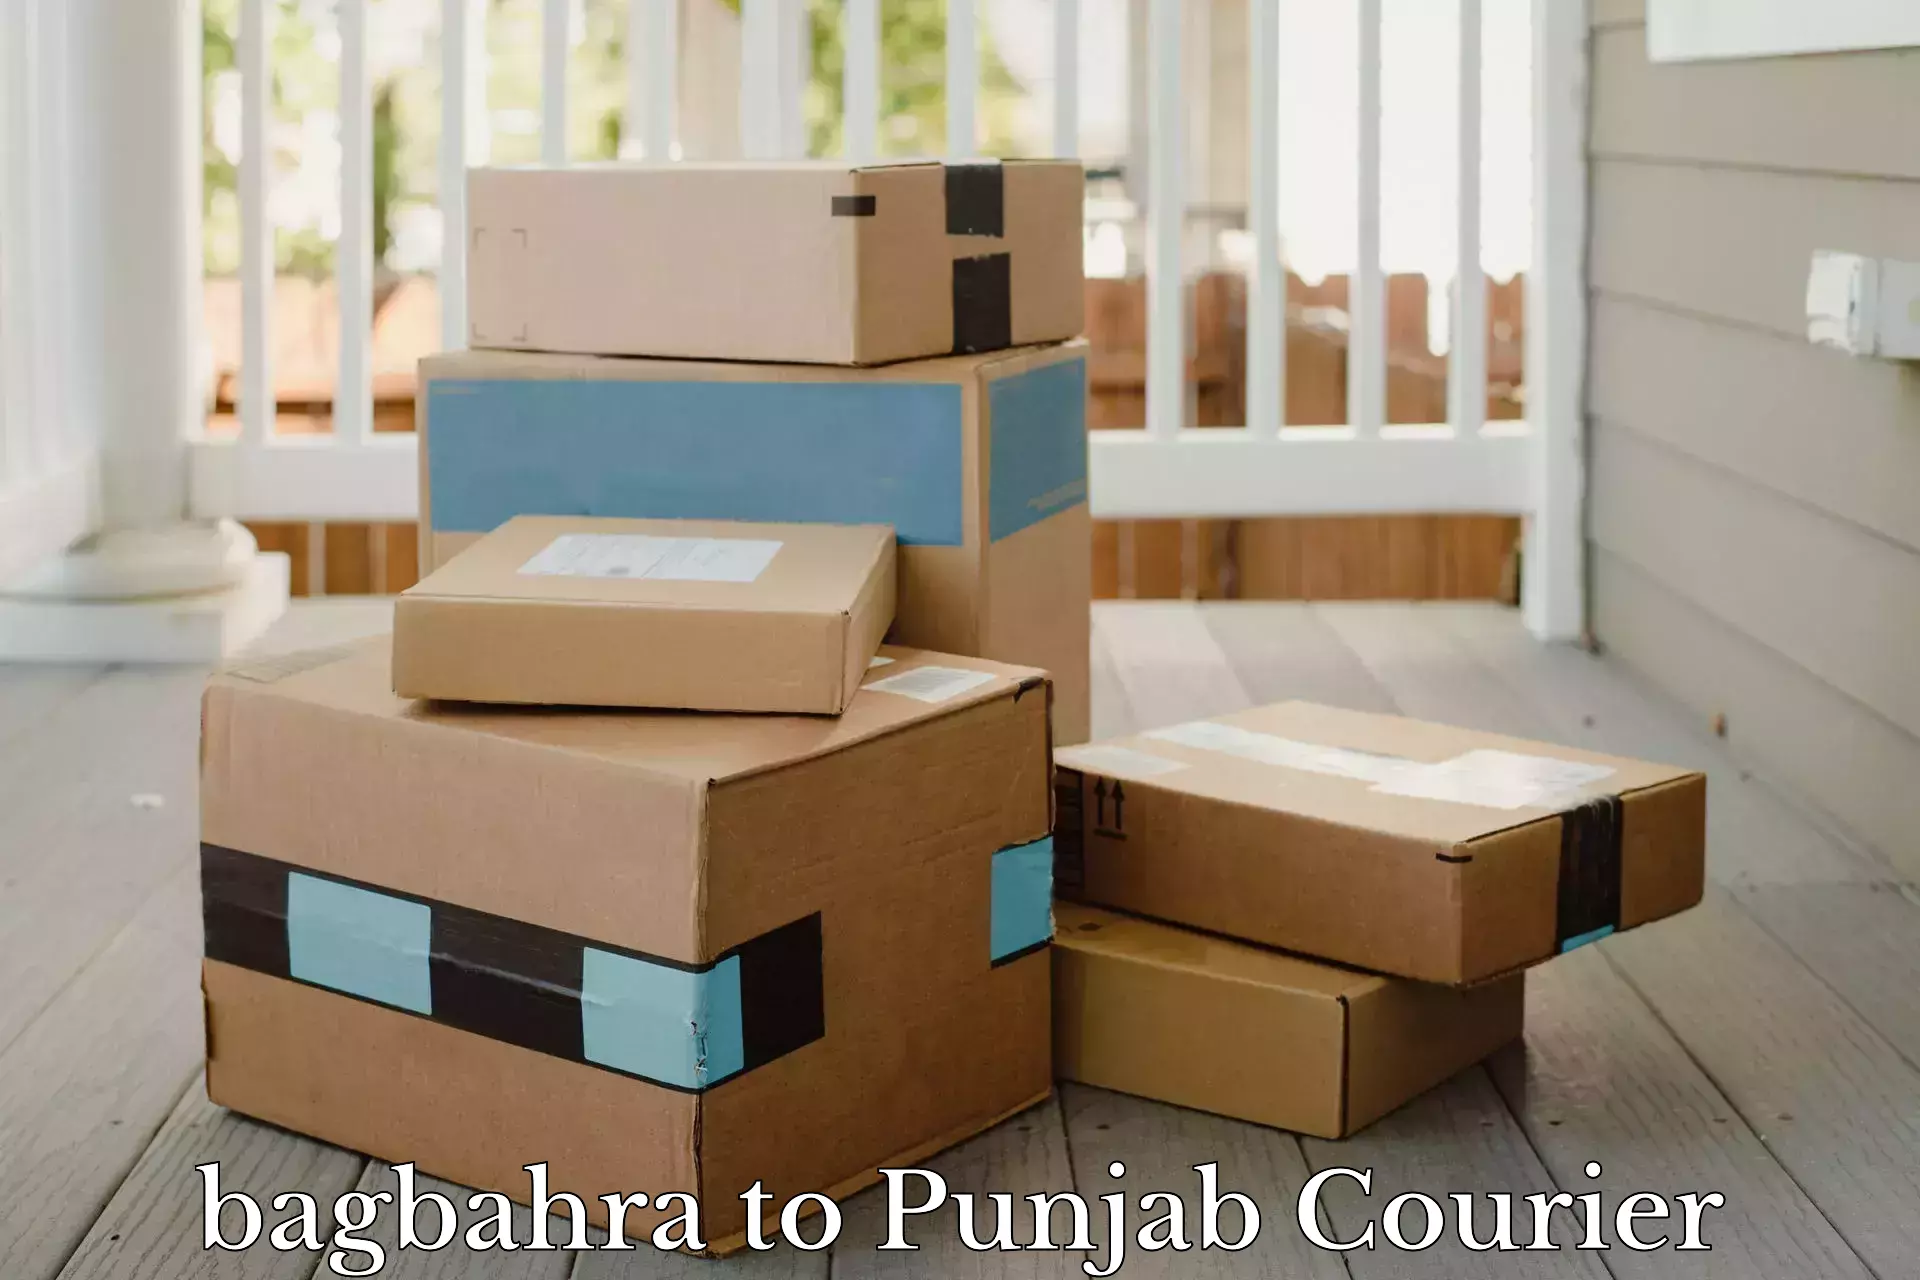 Urgent courier needs bagbahra to Raikot